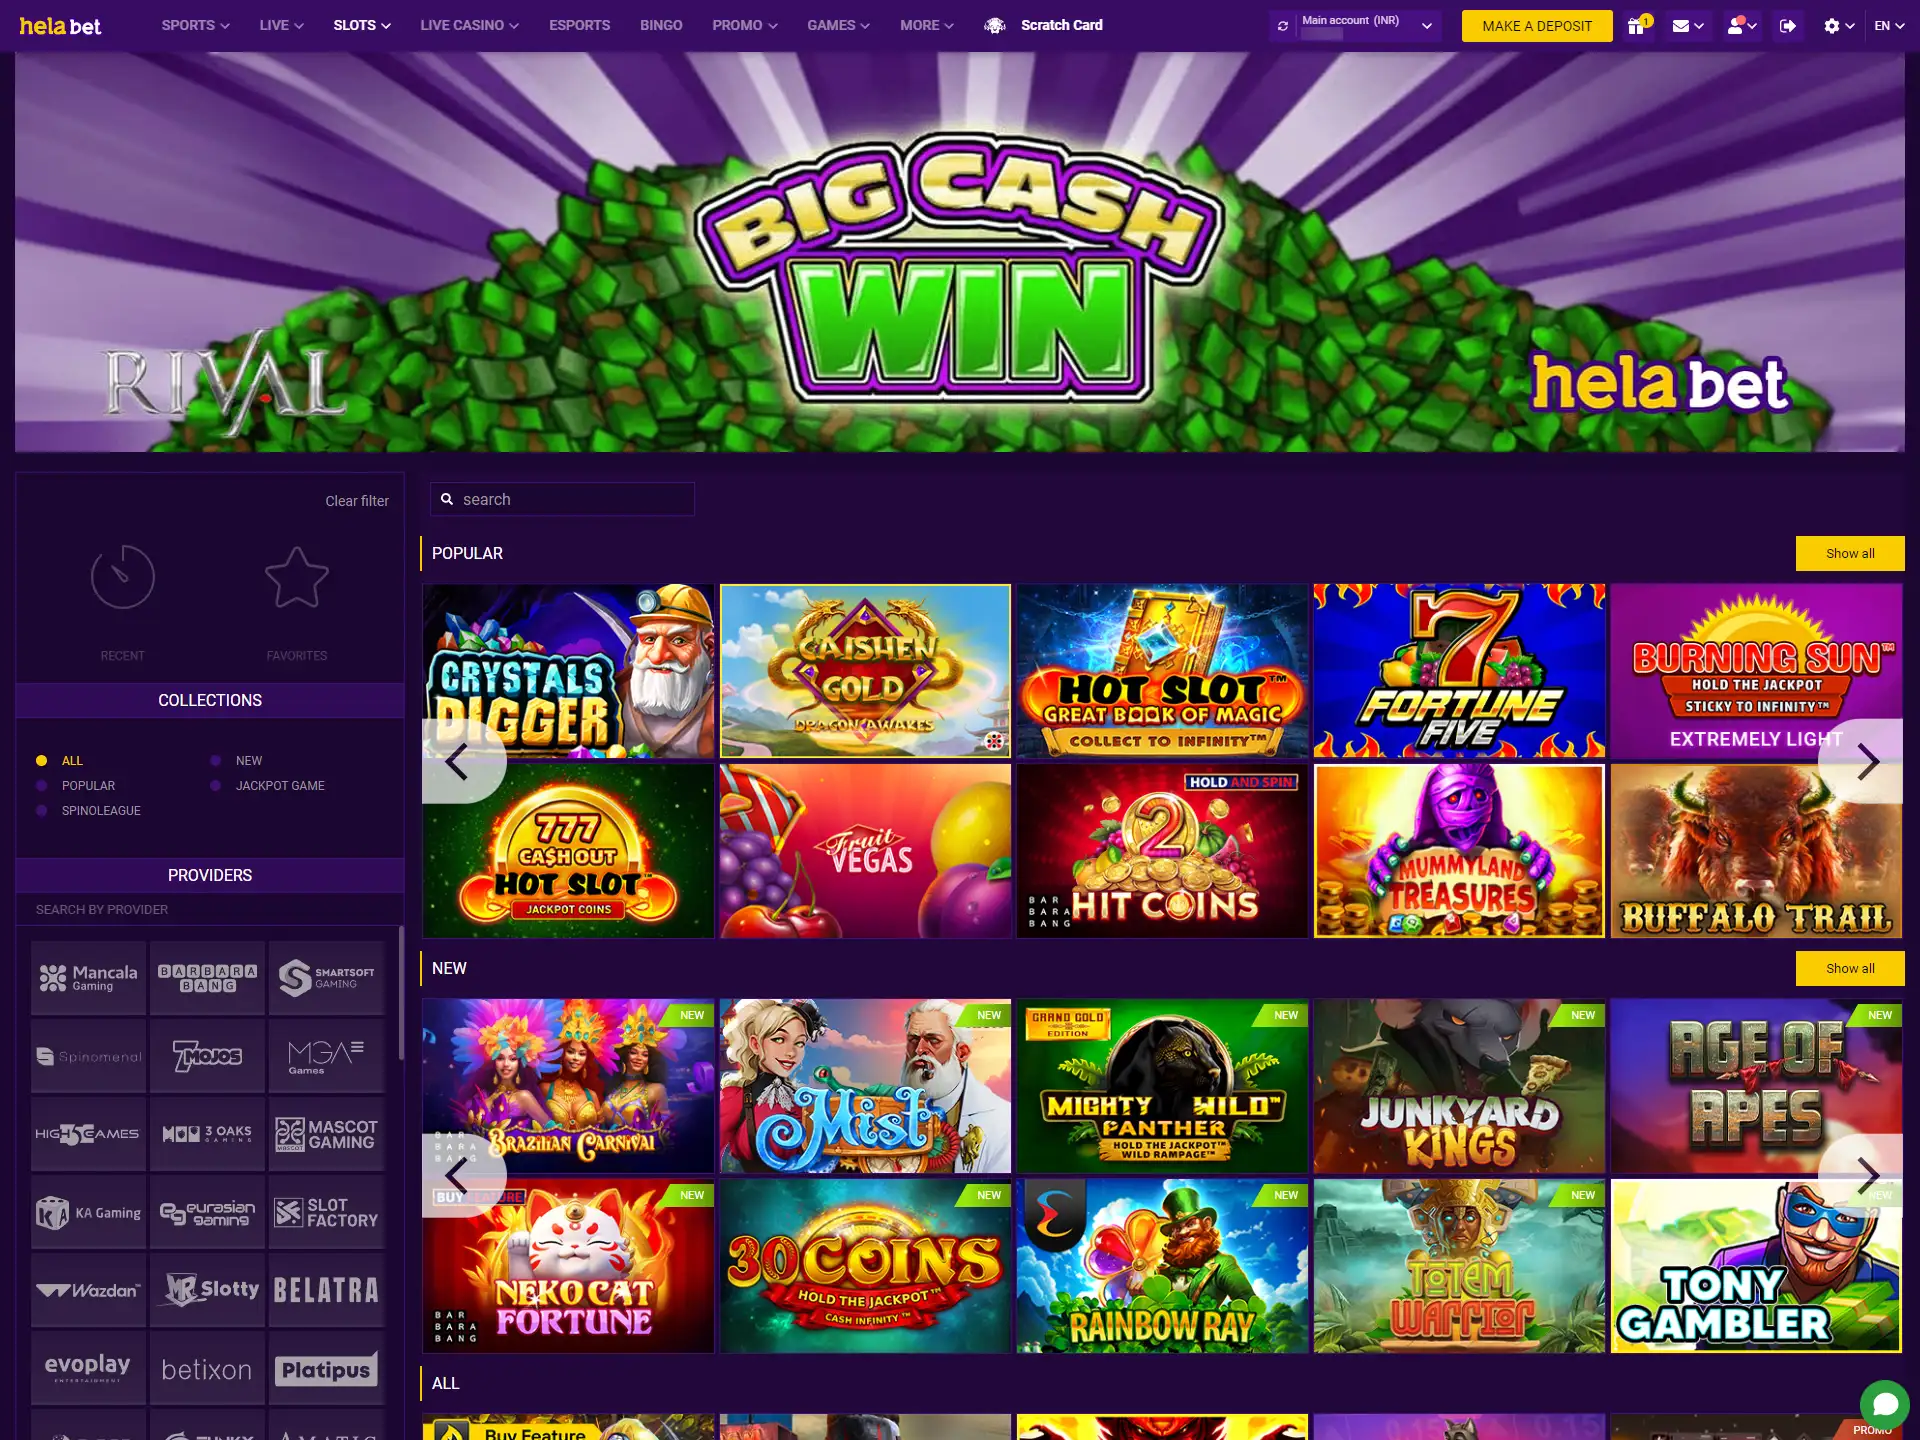 Access your account on the HelaBet and explore casino games!